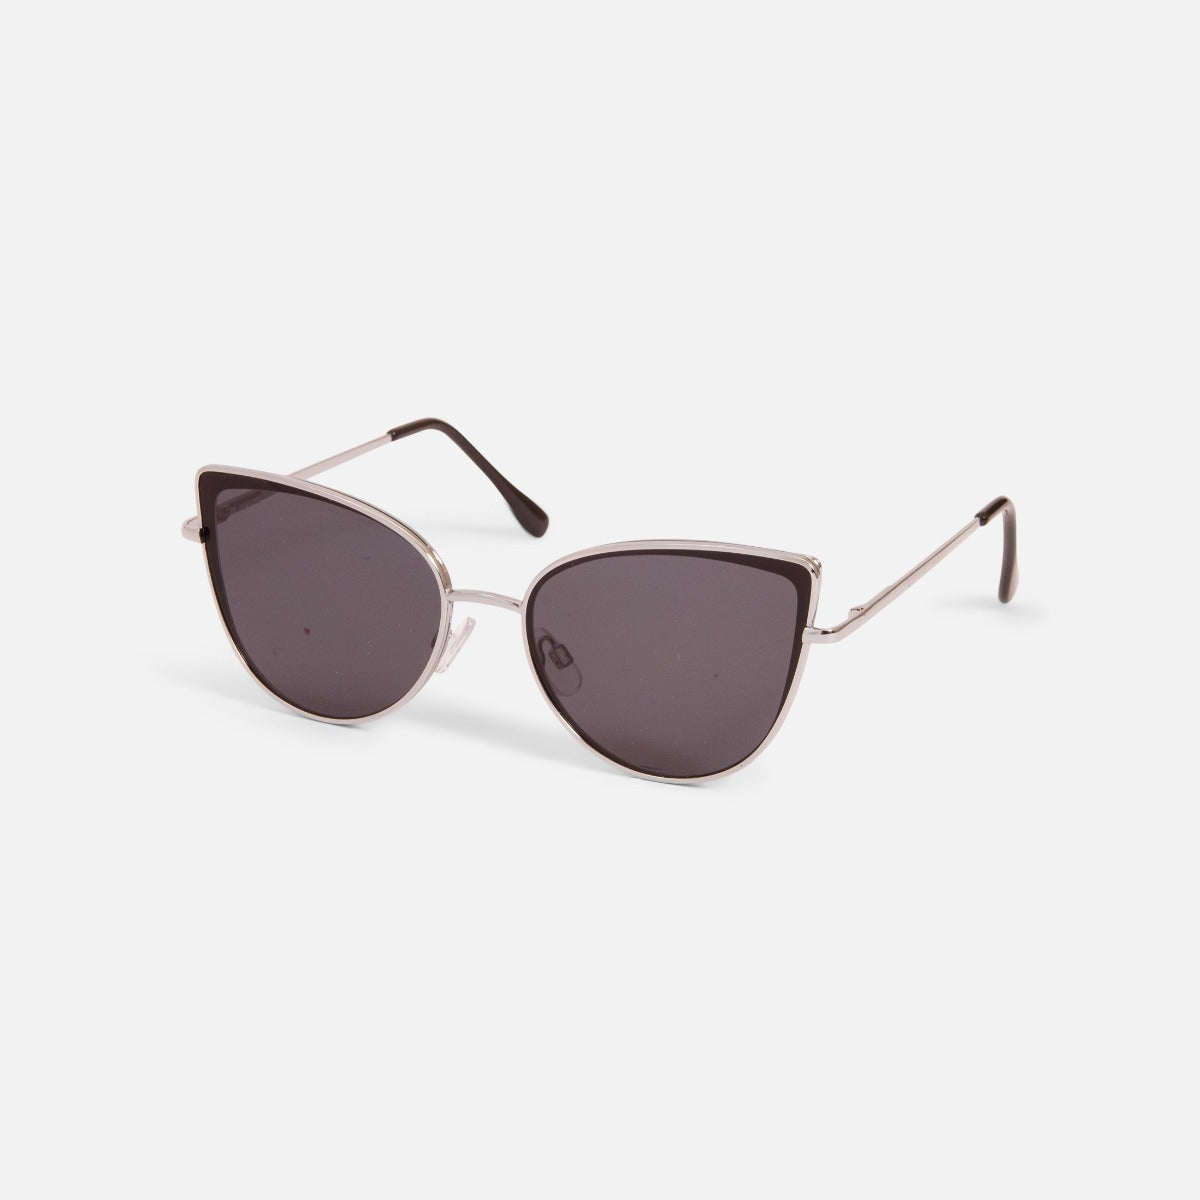 Black cat eye sunglasses with thin branches